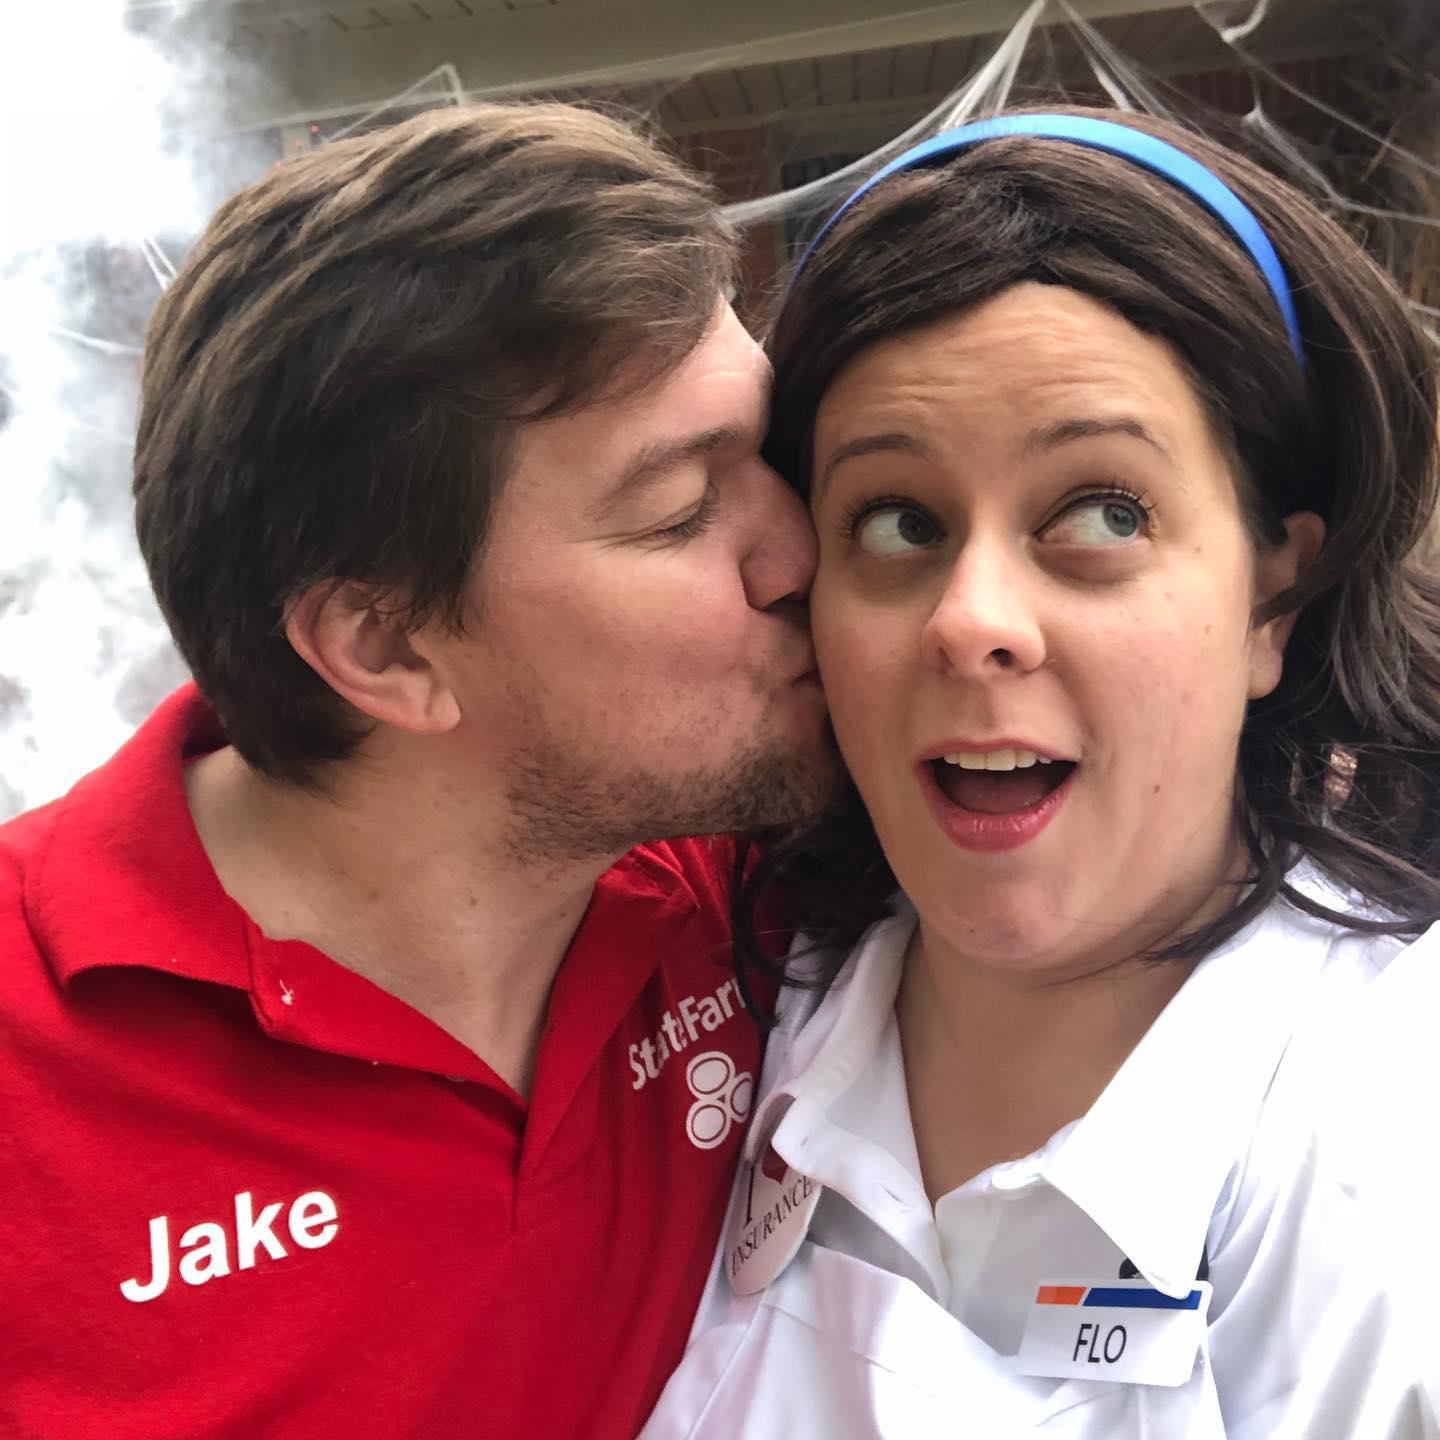 Our 3rd Halloween together. Jake from State Farm and Flo from Progressive! (2021)